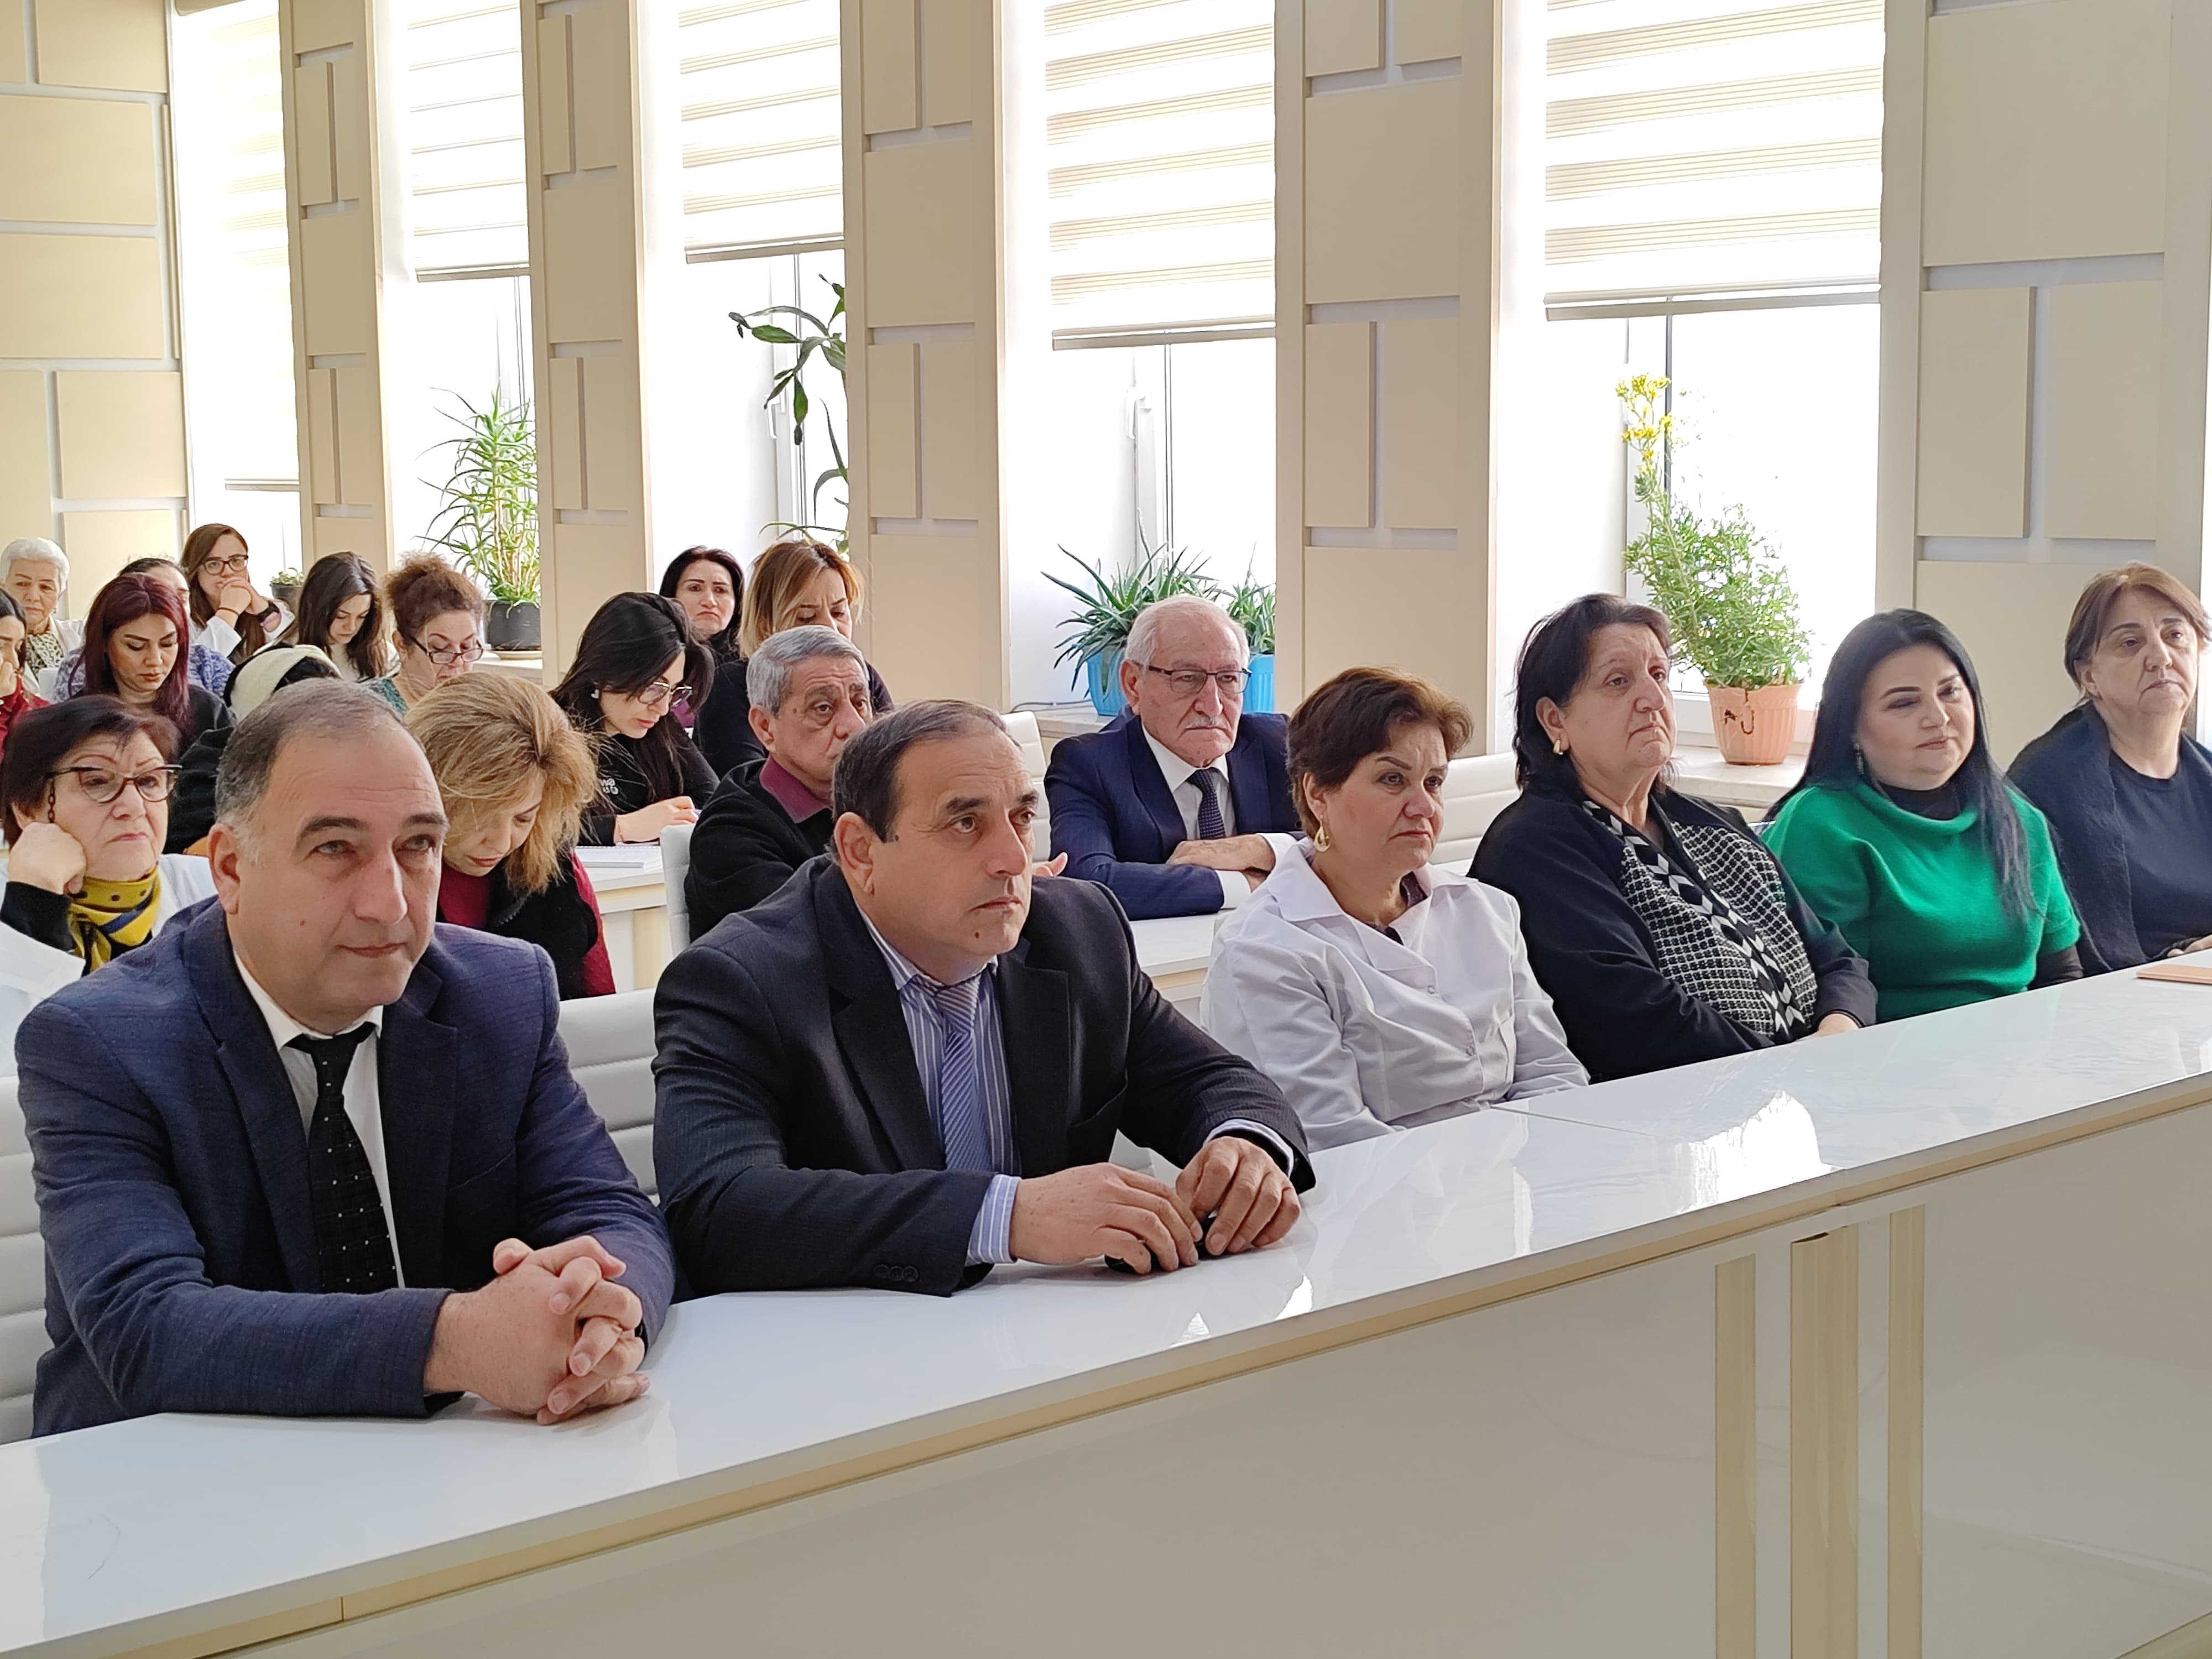 A commemorative event on the 32nd anniversary of the Khojaly Genocide was held at the Institute of Soil Science and Agrochemistry of the Ministry of Science and Education of the Republic of Azerbaijan